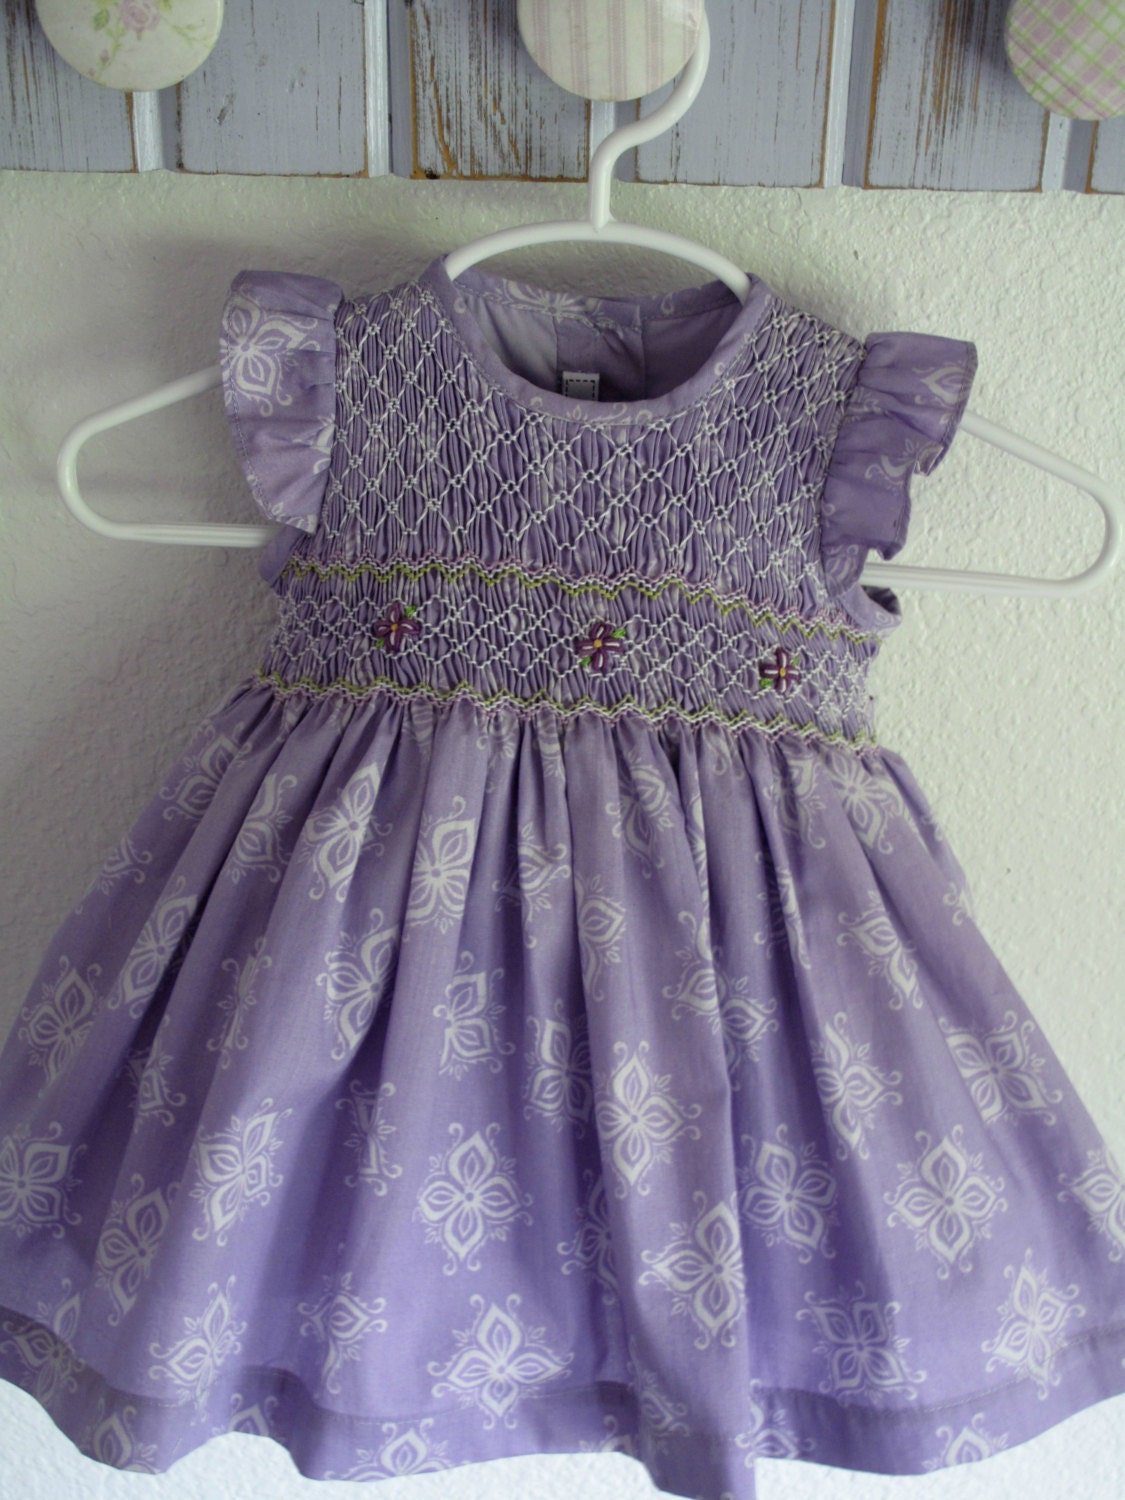 Beautiful hand smoked lavender baby dress Angel wing sleeves